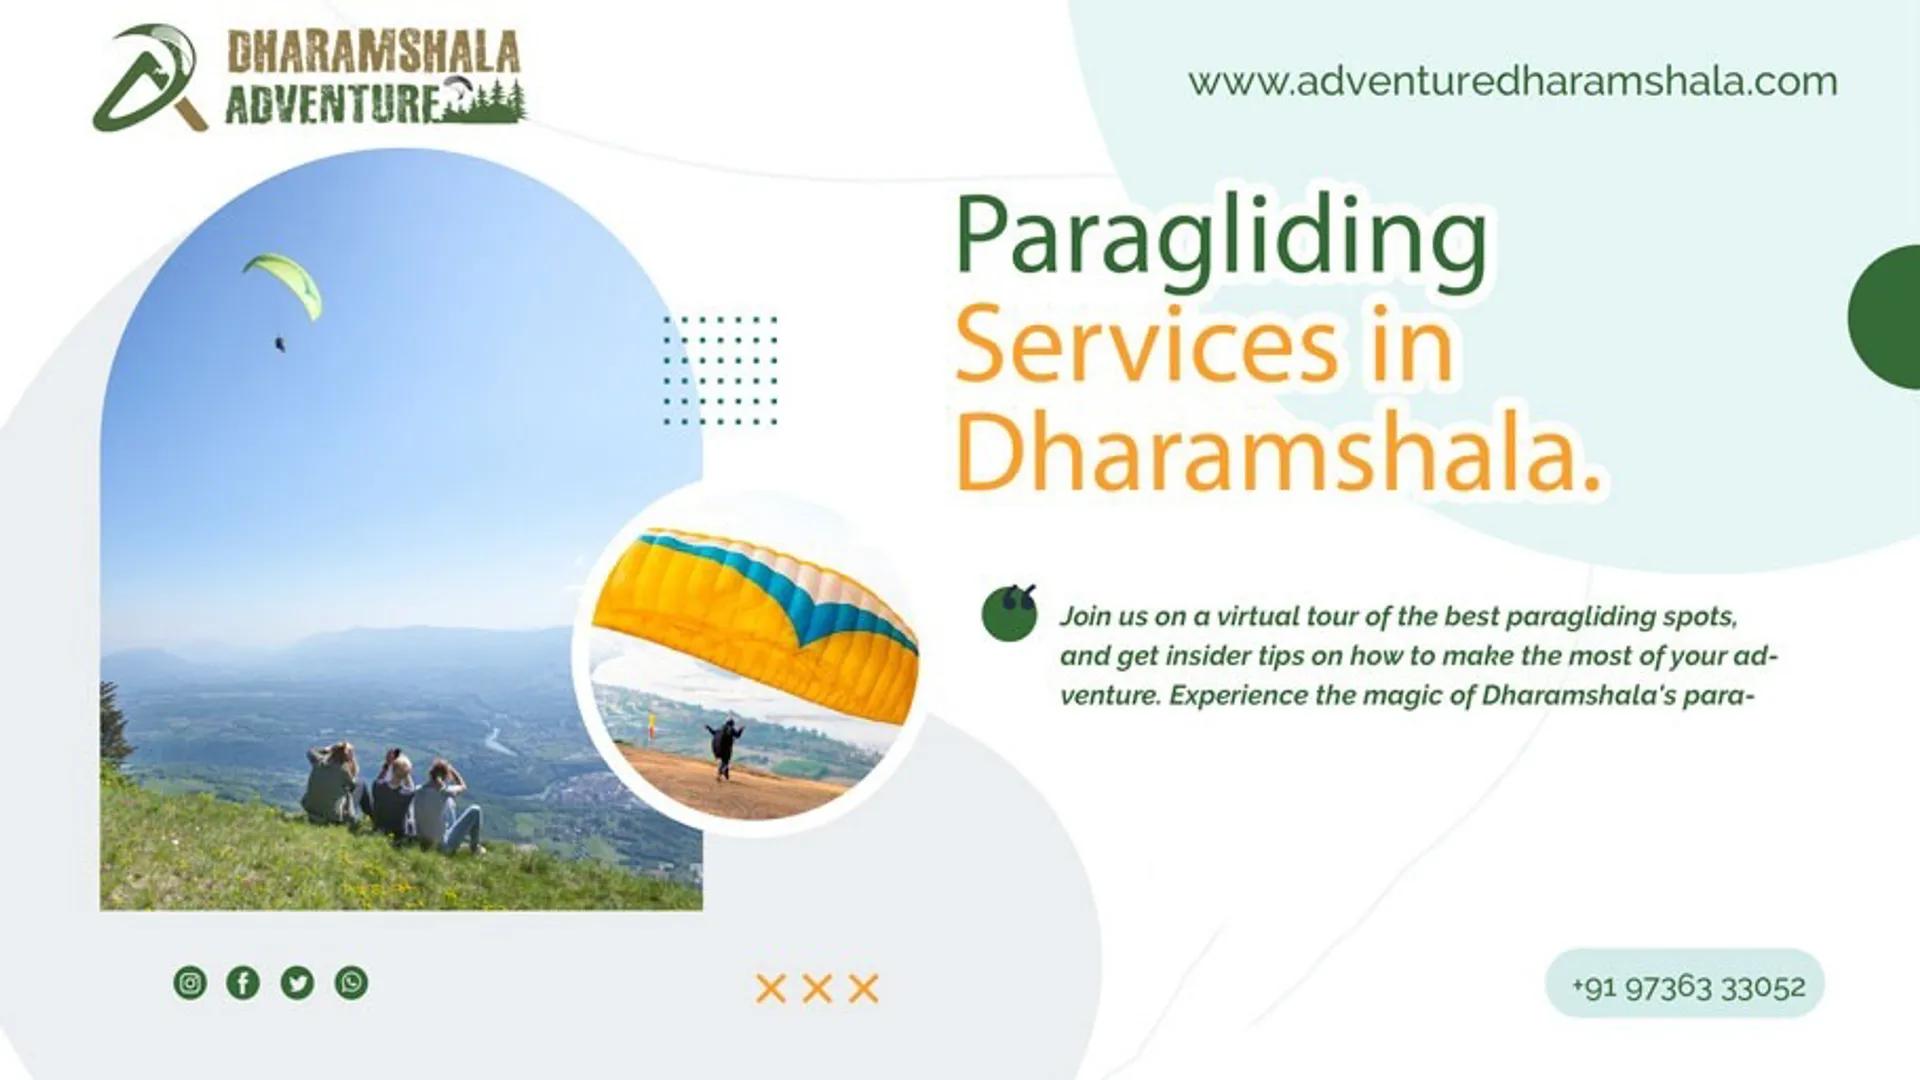 Adventure Dharamshala welcomes you to experience the thrill of paragliding in the mesmerizing landscapes of Dharamshala with our exceptional Paragliding Services in Dharamshala.

Unleash your adventurous spirit and create unforgettable memories with Adventure Dharamshala's top-notch Paragliding Services. Come, embrace the freedom of the skies and embark on a thrilling escapade like no other! https://bit.ly/3PYPEkv